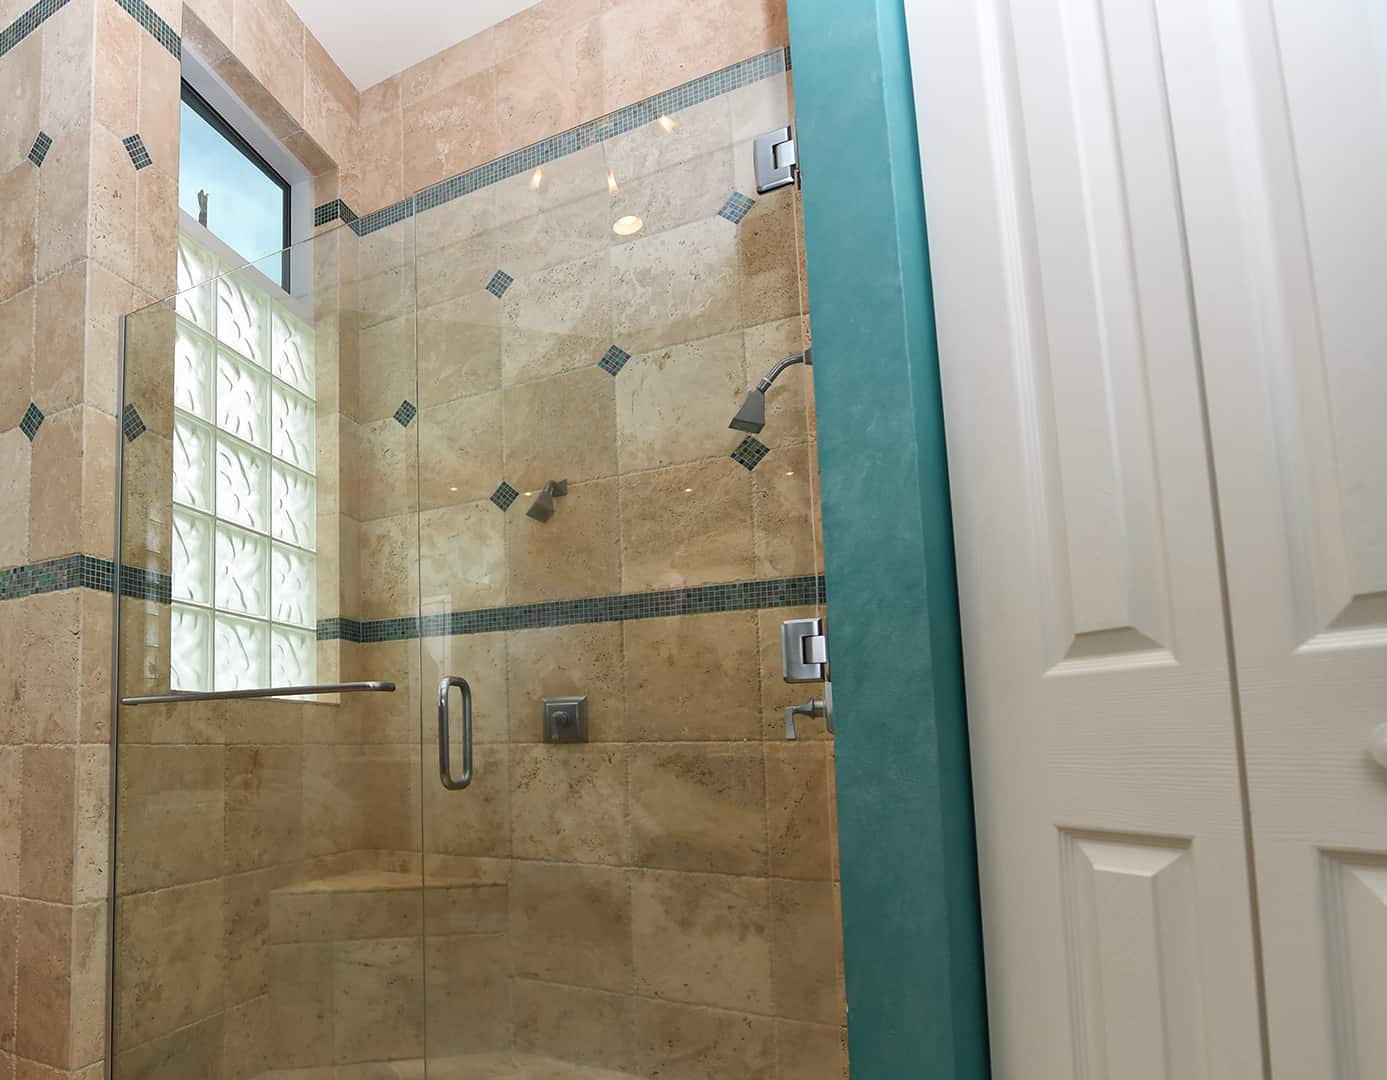 Floor view looking upward at master bathroom, beige ceramic tile with green accents, step up soaker tub, tiled glass window, accent candles, swinging glass door and glass shower wall by Aldora, chrome hardware